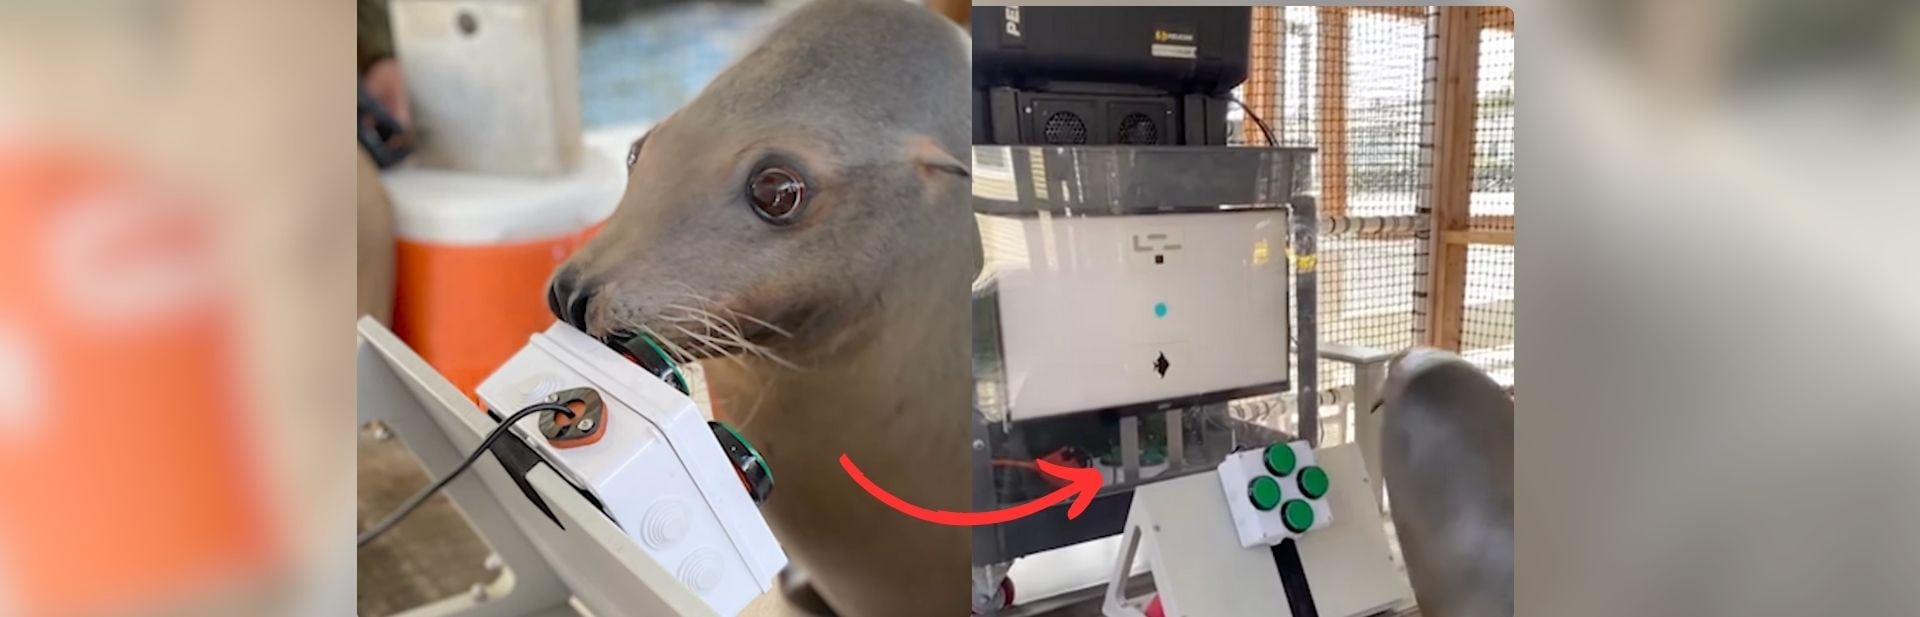 This Sea Lion Playing Video Games is the Cutest Gamer You’ll Ever See